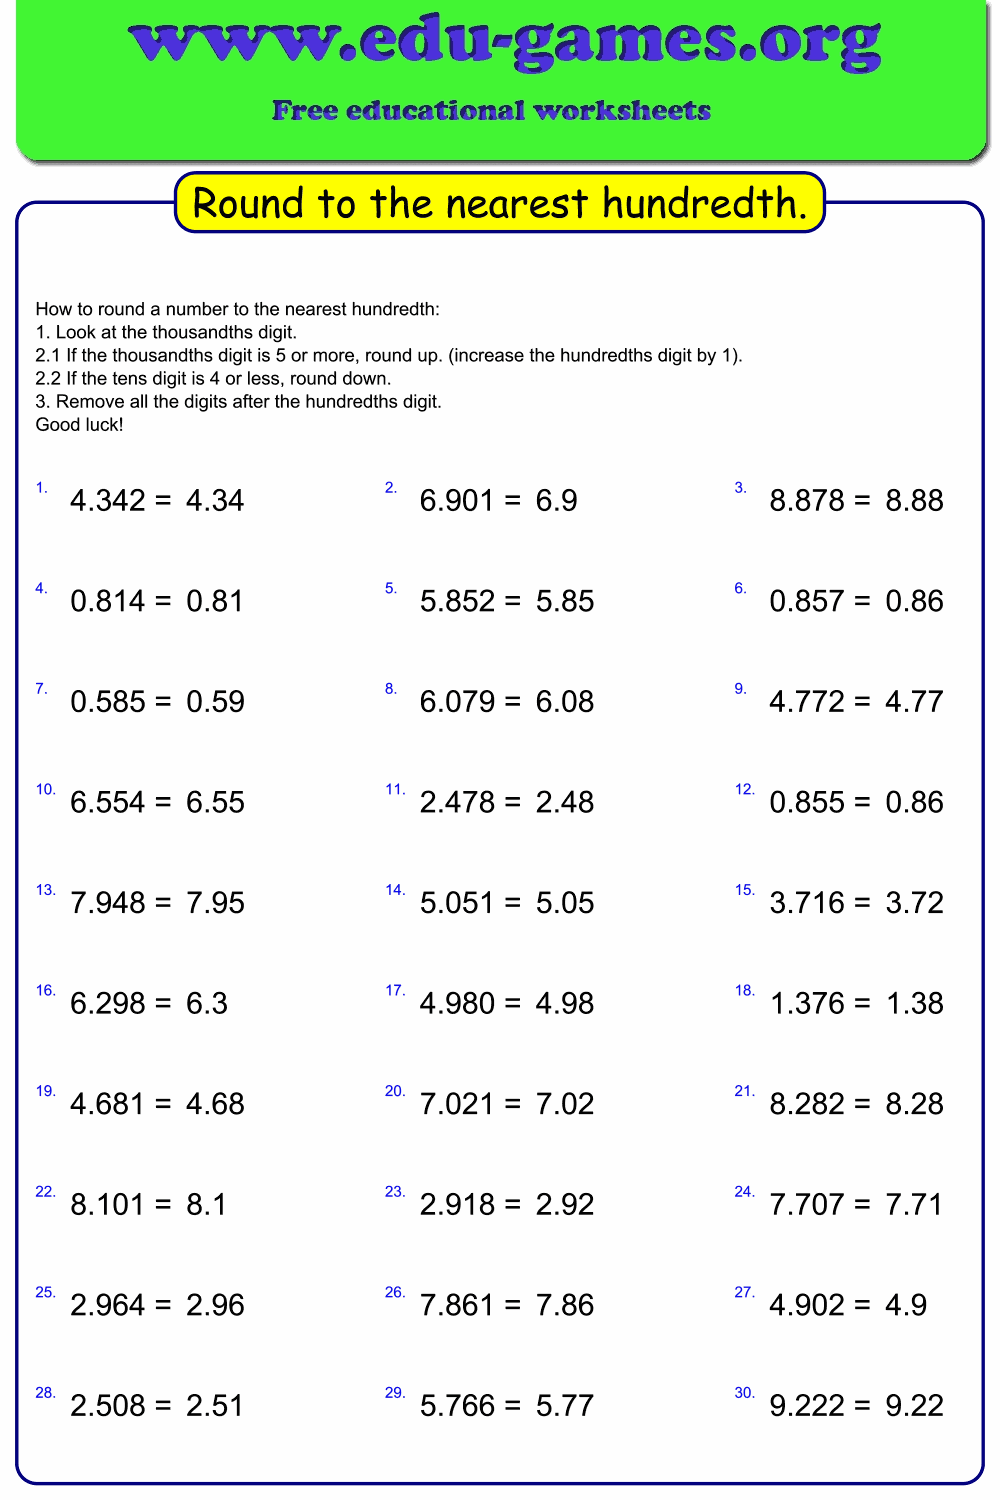 Rounding up or down decimals| Round to the tenth or hundredth Worksheets